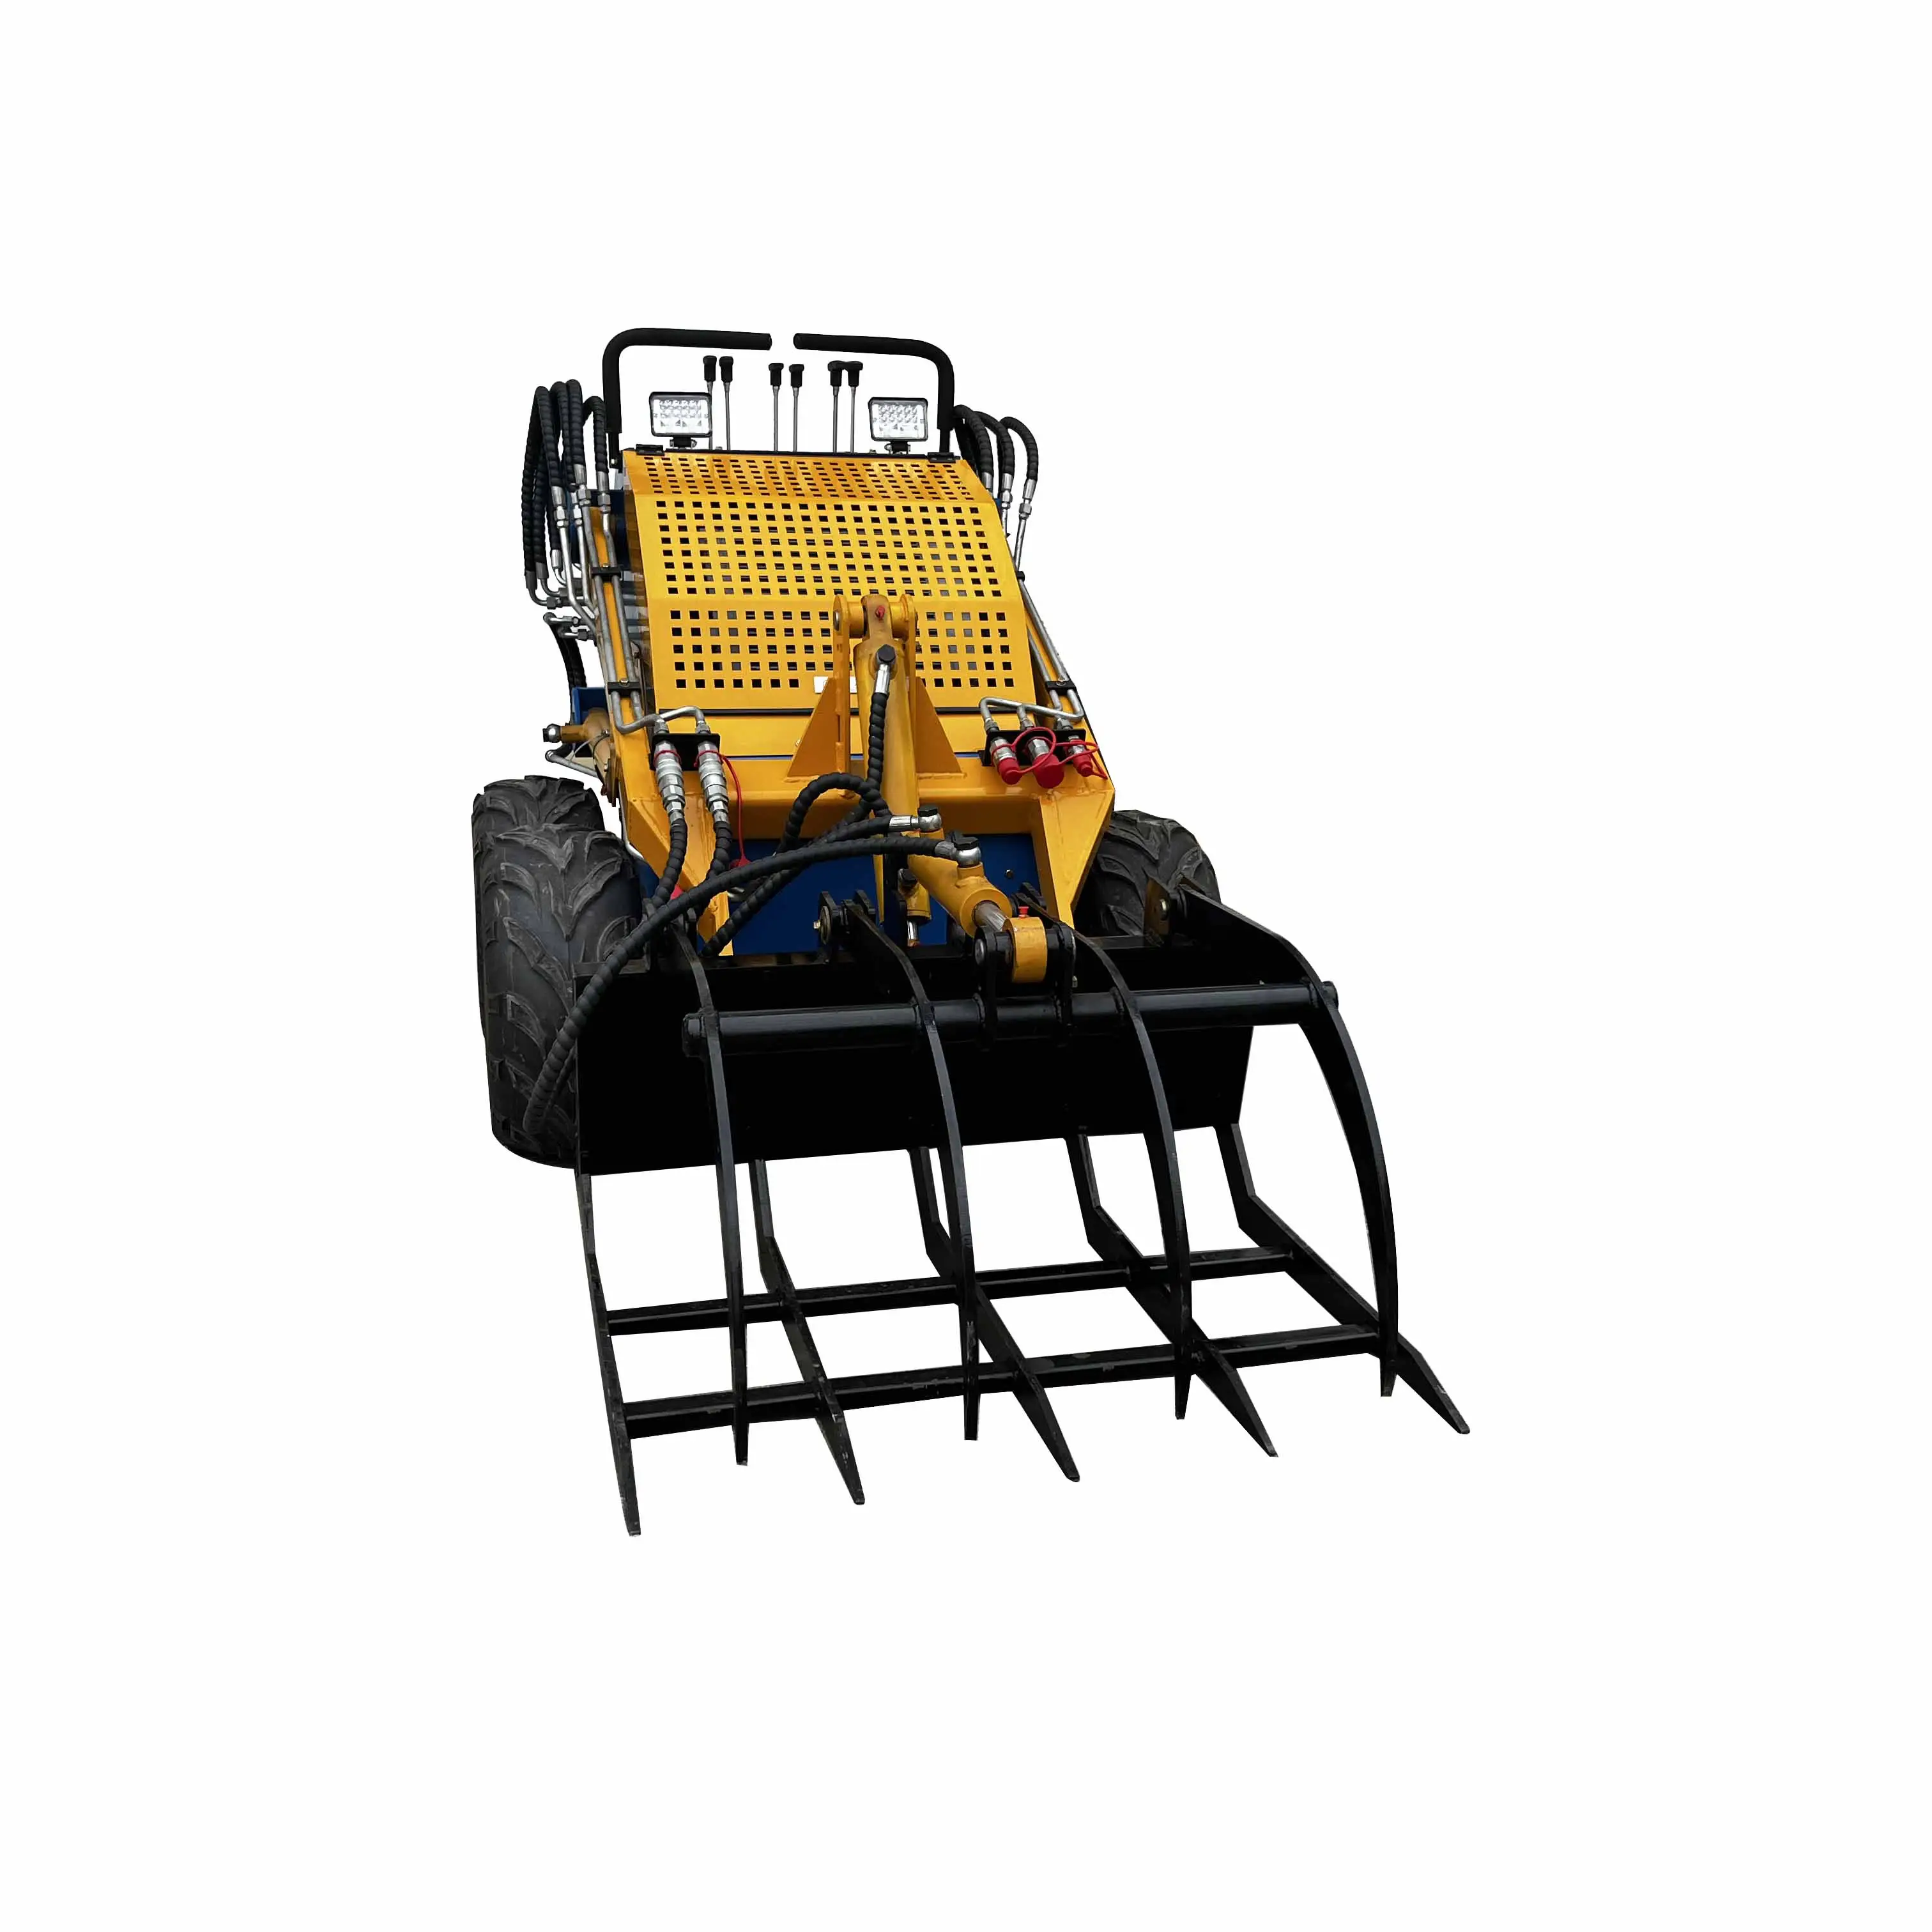 good quality mini skid steer grapple front end loader with log grapple wheel loader grapple forks made in China